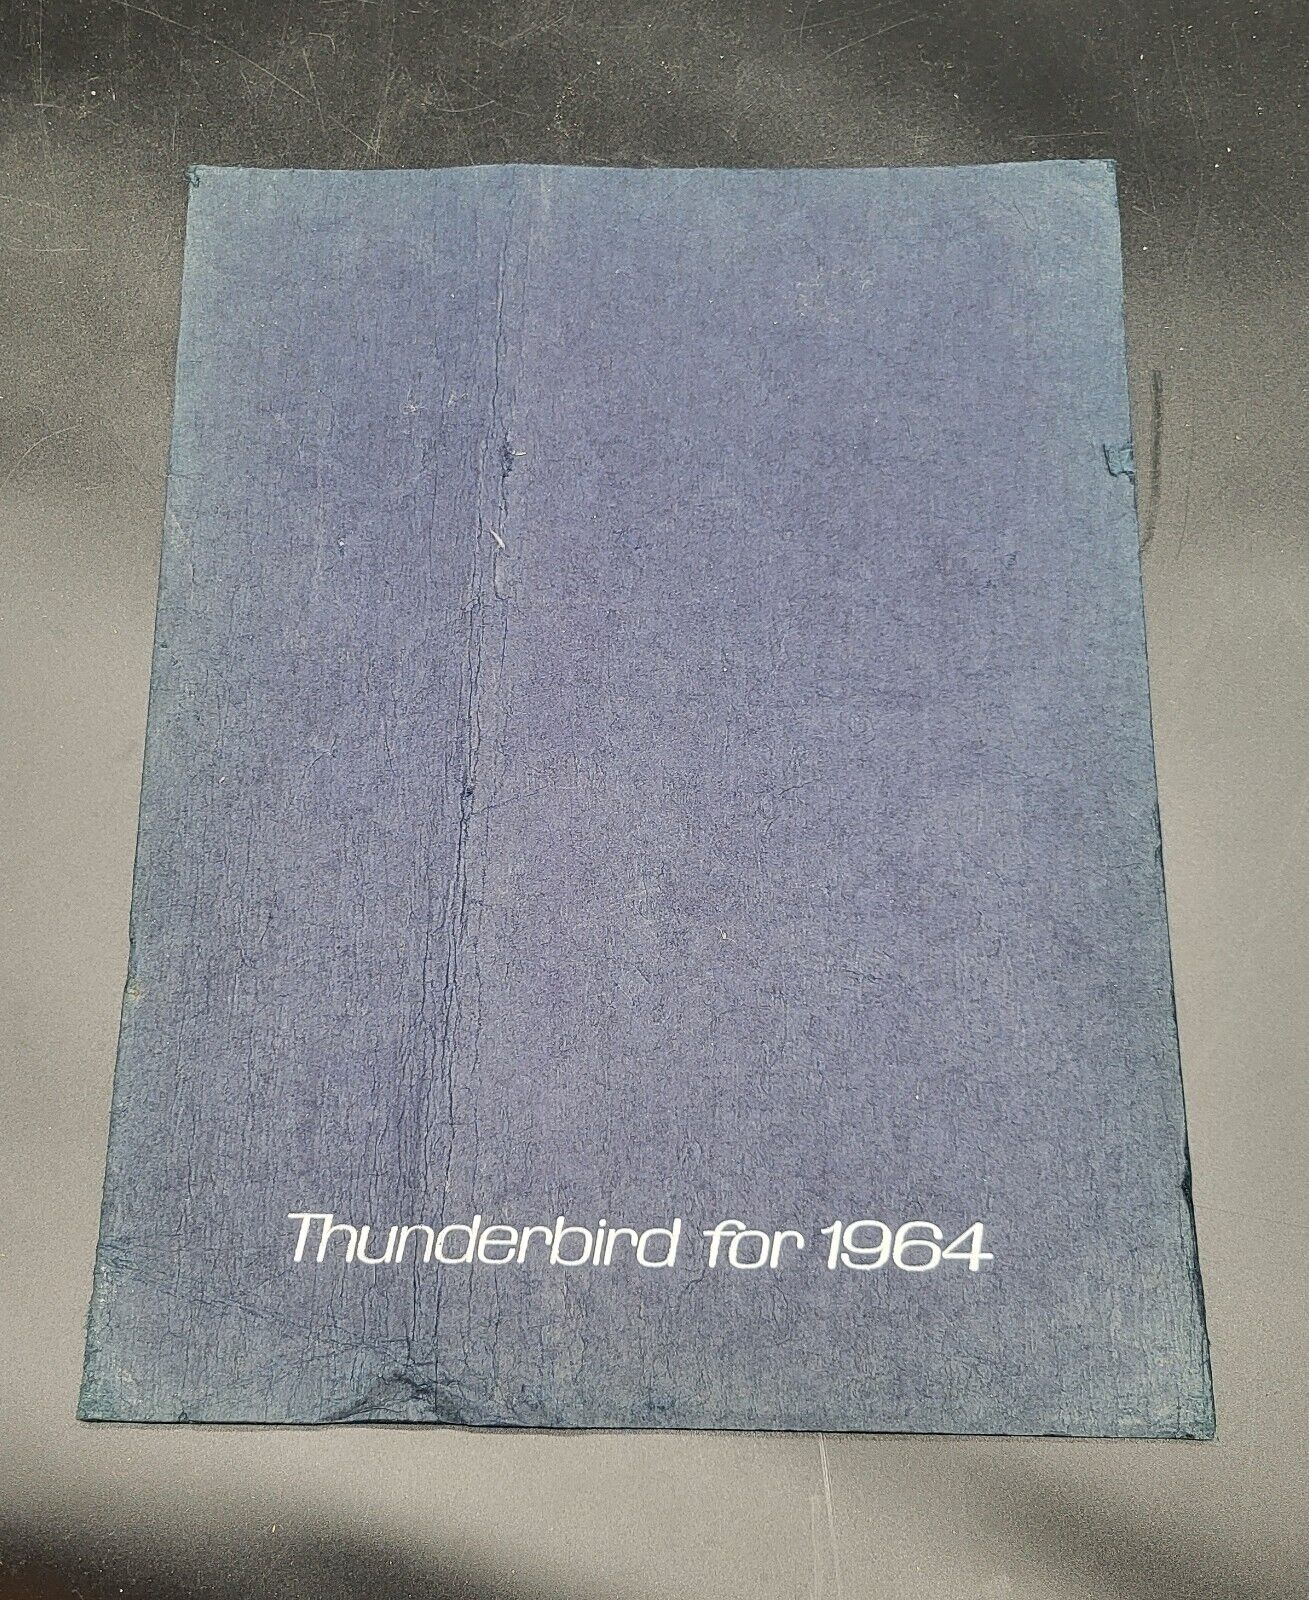 1964 Ford Thunderbird Dealership Brochure, Catalog, full color pages